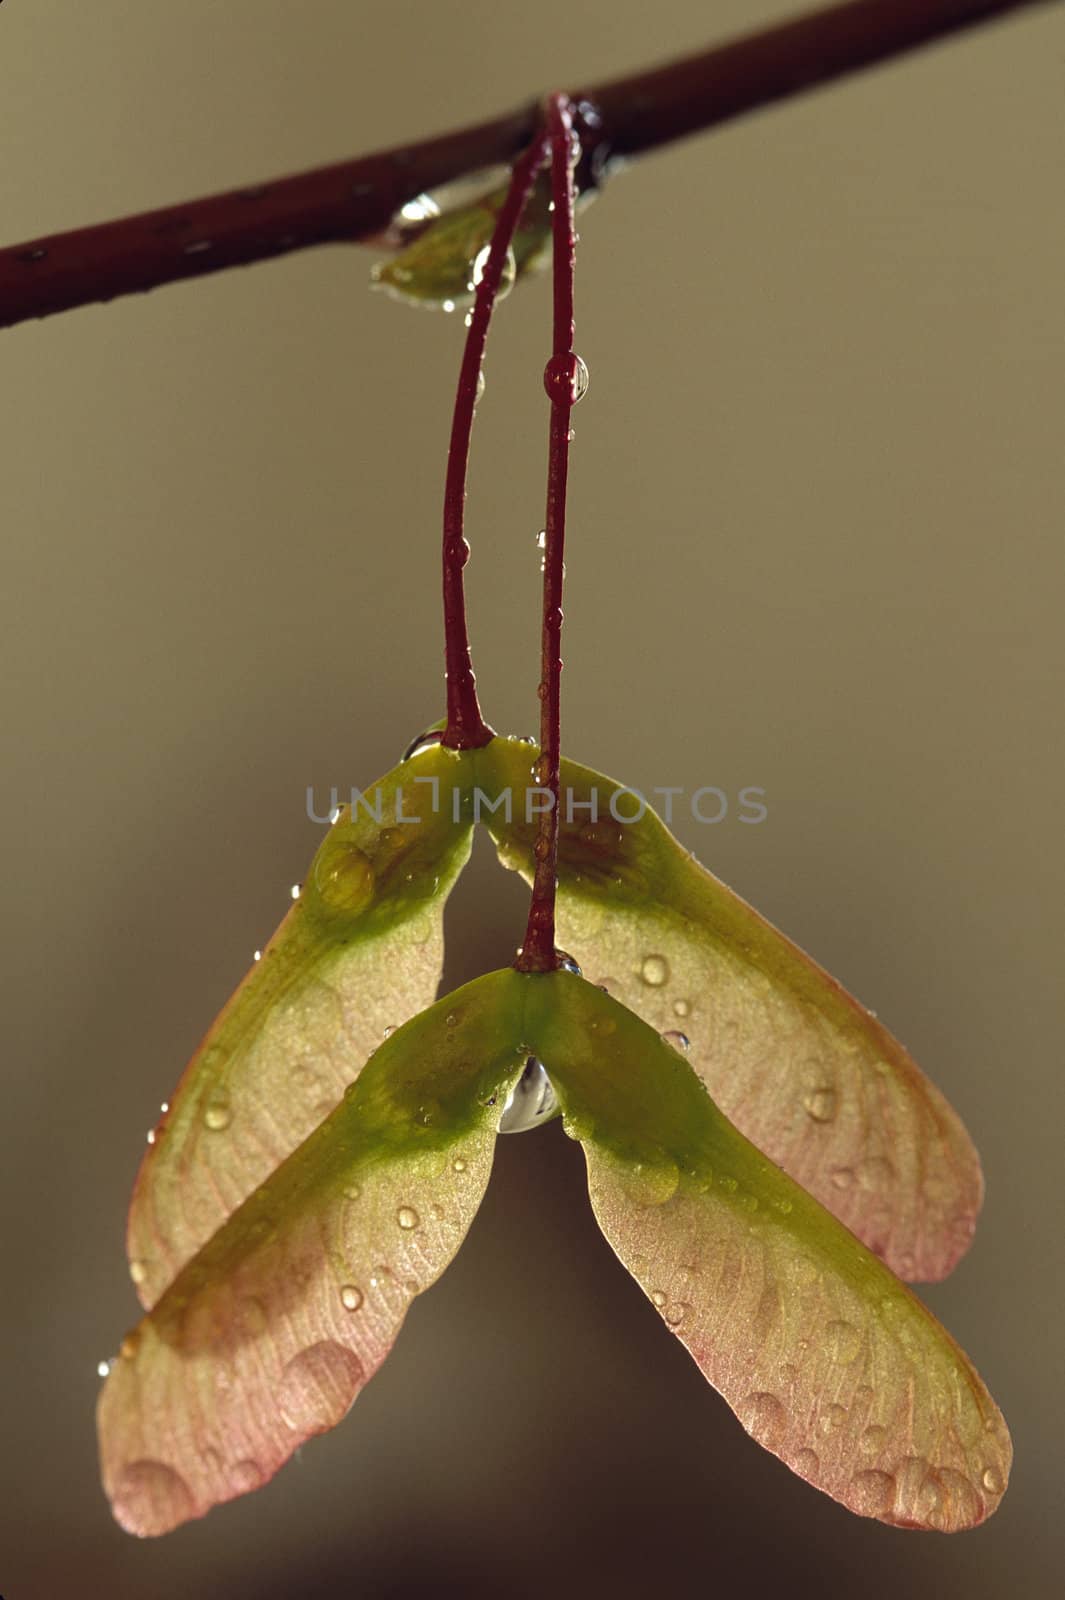 A pair of Maple seed pods on branch with water droplets